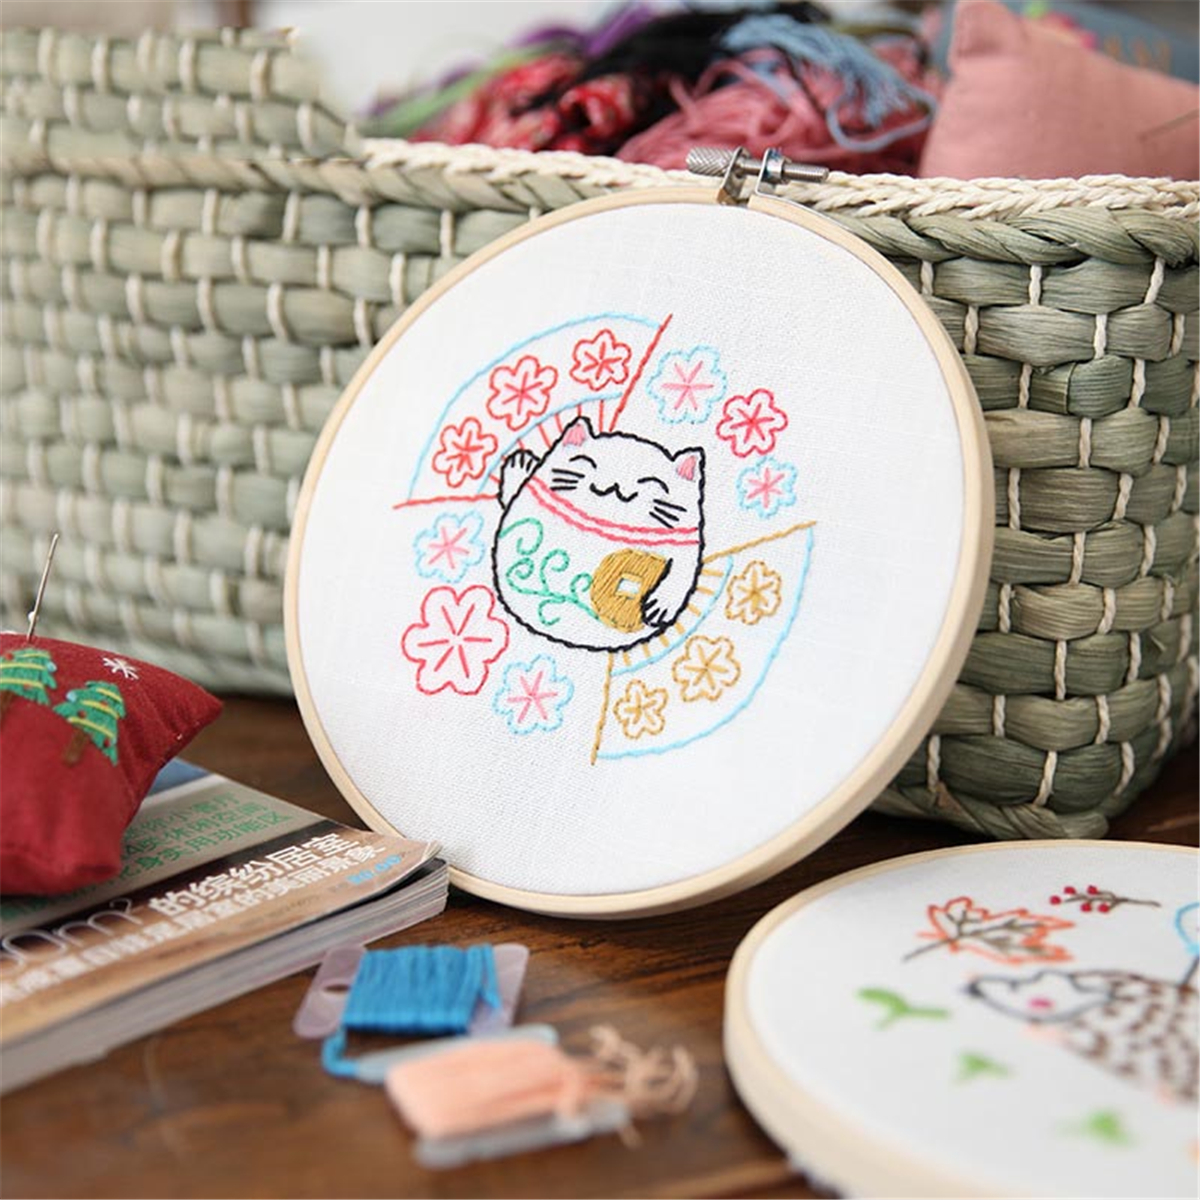 Hand-Embroidery-DIY-Cloth-Arts-Handmade-Cross-Stitch-Hanging-Chinese-Style-Painting-for-Home-Decorat-1688553-6